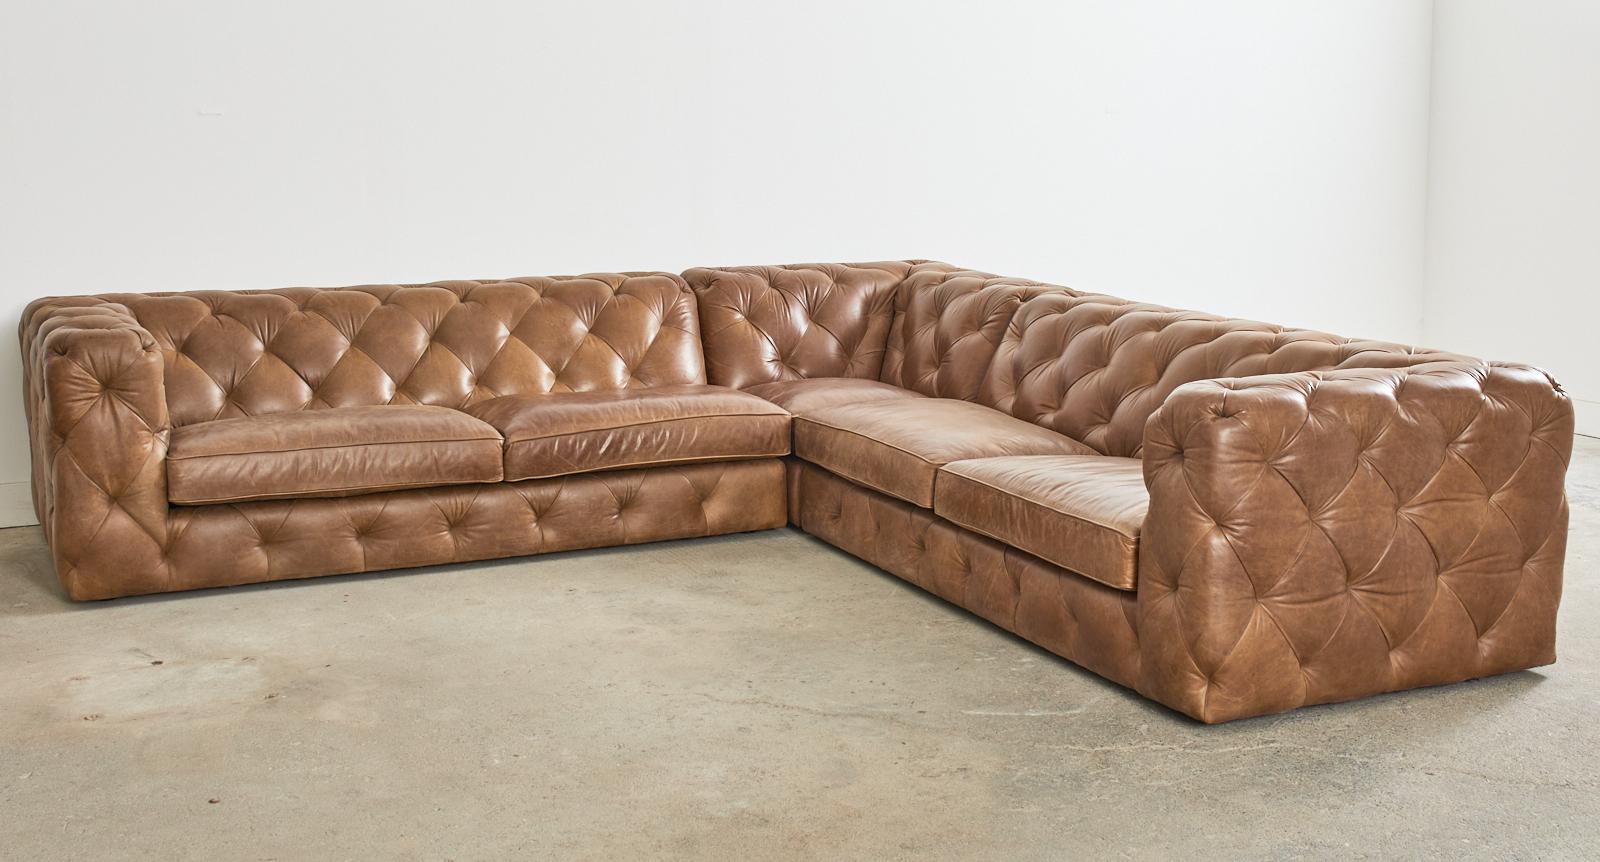 Hand-Crafted Neiman-Marcus Three Piece Tufted Leather Sectional Sofa